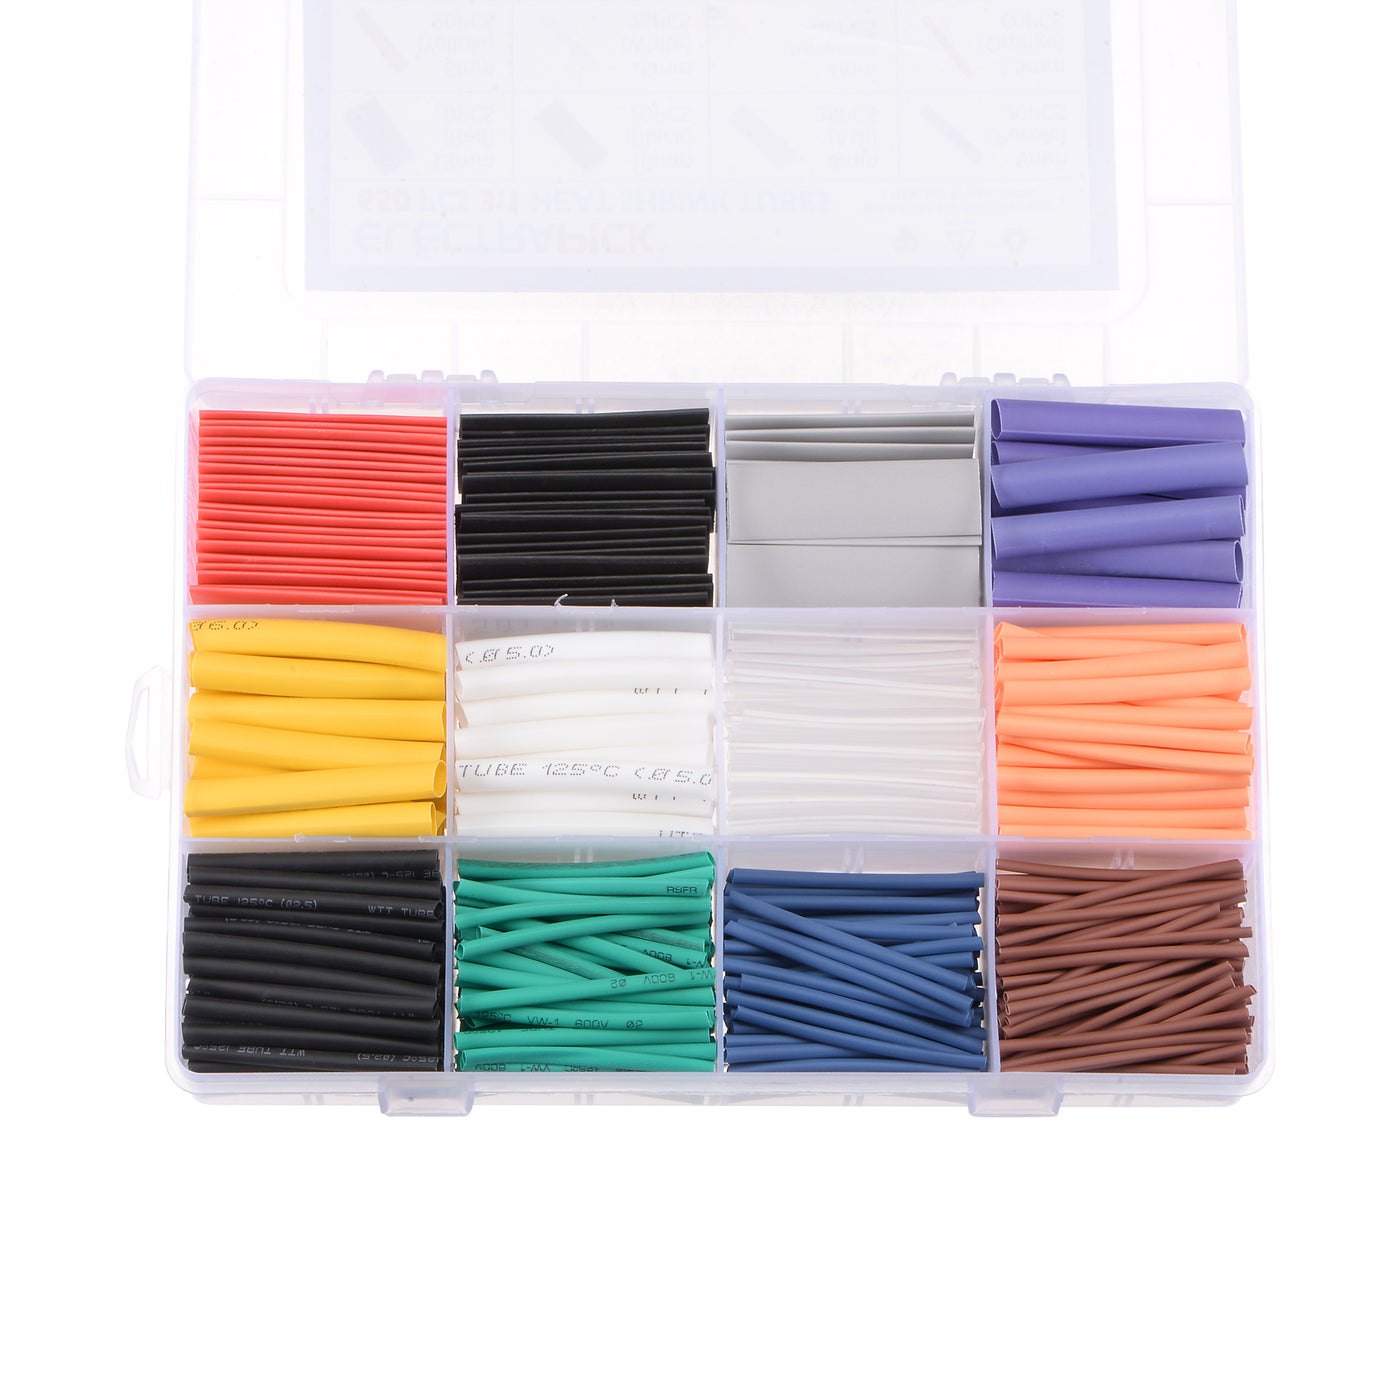 uxcell Uxcell 650pcs 3:1 Adhesive Heat Shrink Tubing Kit, Heat Shrink Tubes Wire Wrap 11 Sizes